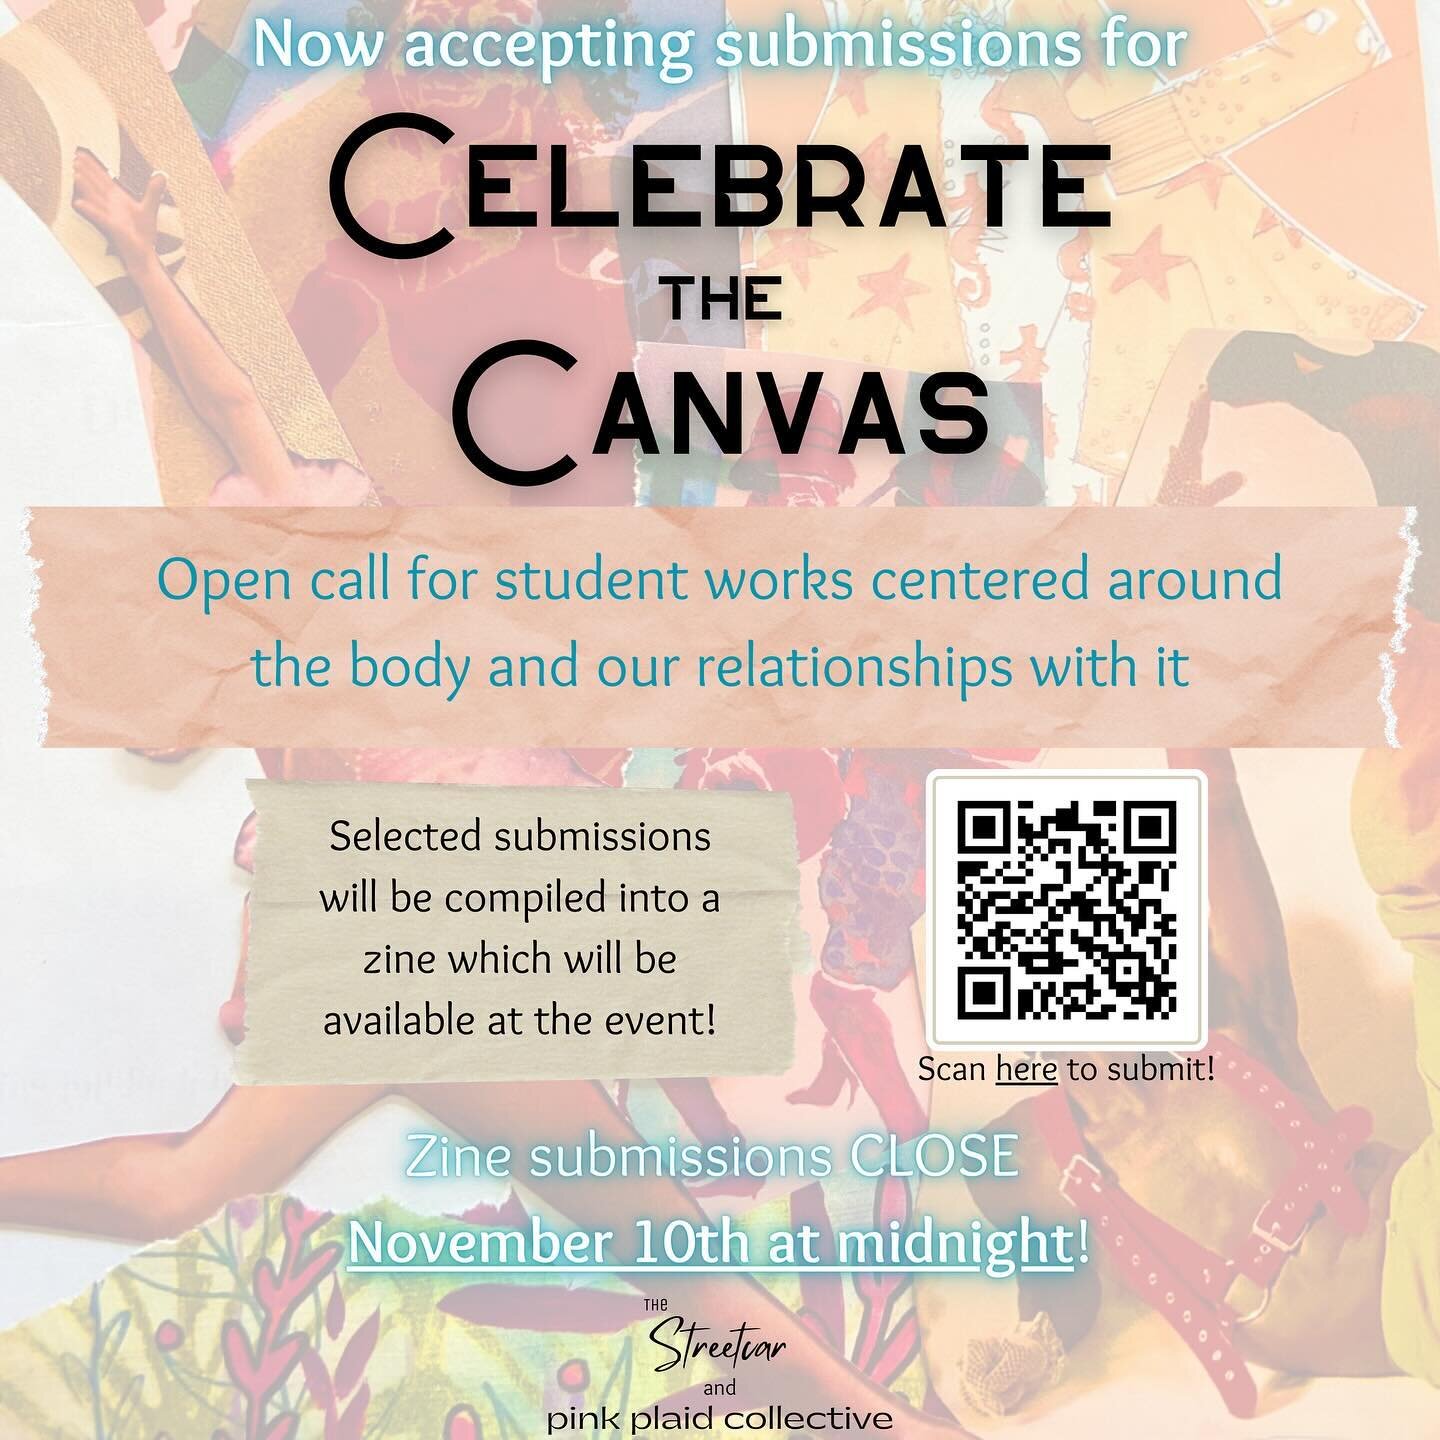 We are now accepting submissions for Celebrate the Canvas, a collaborative event between The Streetcar and Pink Plaid Collective! If your work is selected, it will be made a part of the Celebrate the Canvas zine, which we will have free physical copi